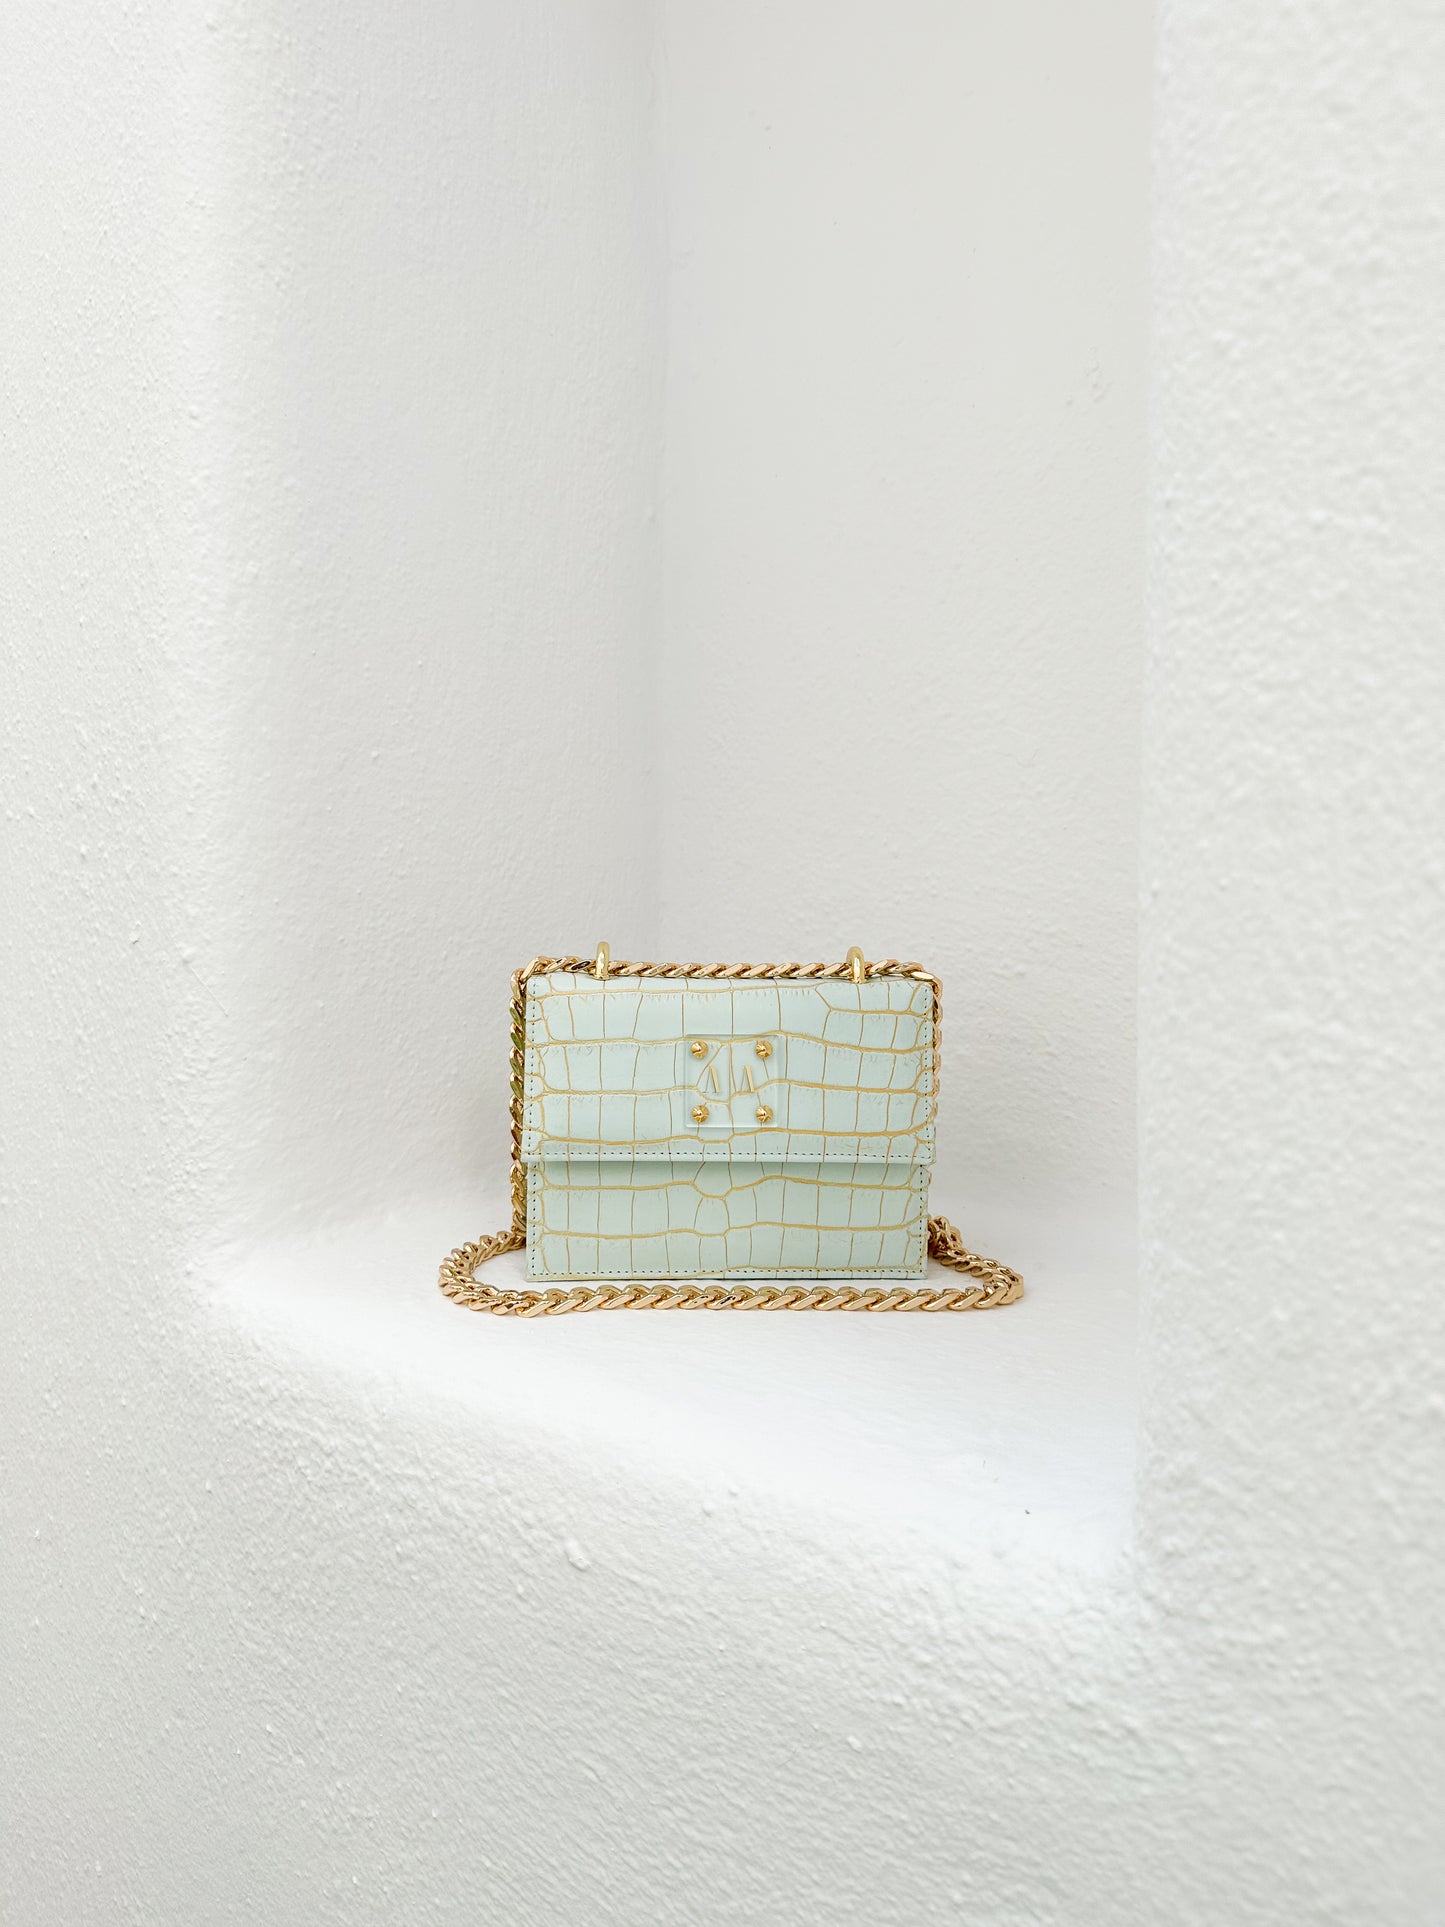 JUNE BAG  PALE BLUE AND GOLD CROC EMBOSSED LEATHER